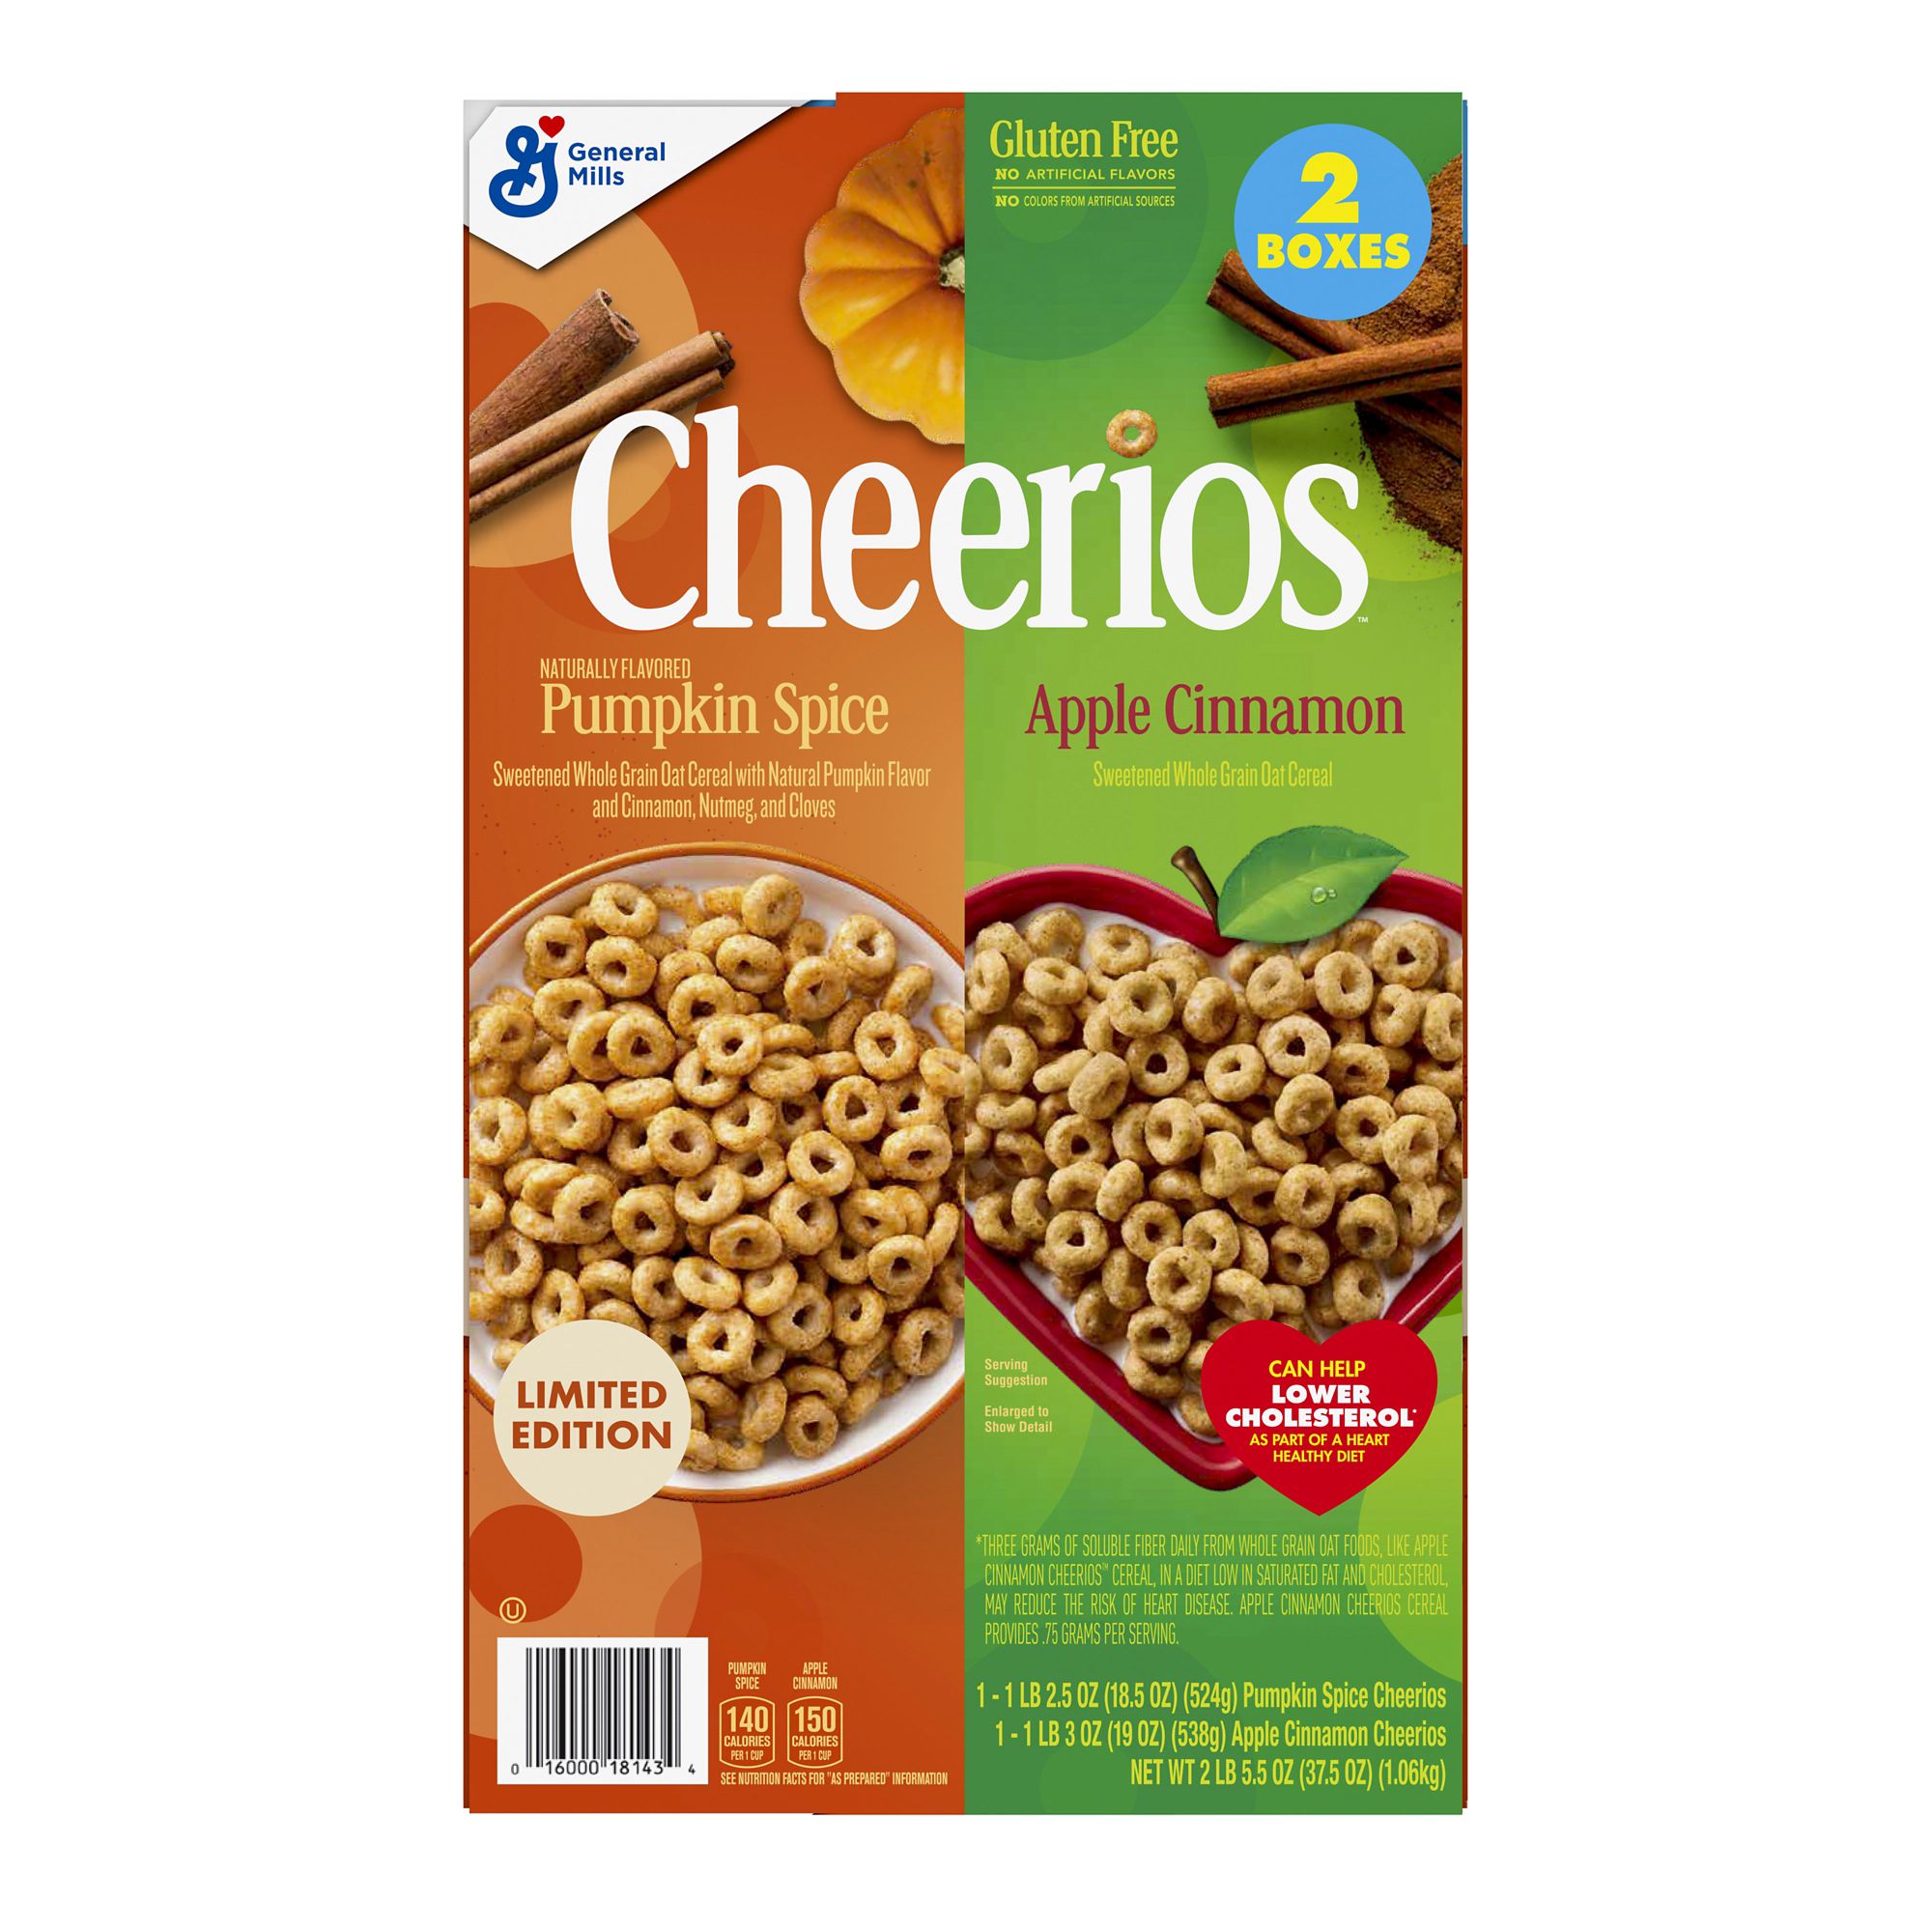 Cheerios Honey Nut Cheerios Heart Healthy Breakfast Cereal, Gluten Free  Cereal With Whole Grain Oats, 10.8oz